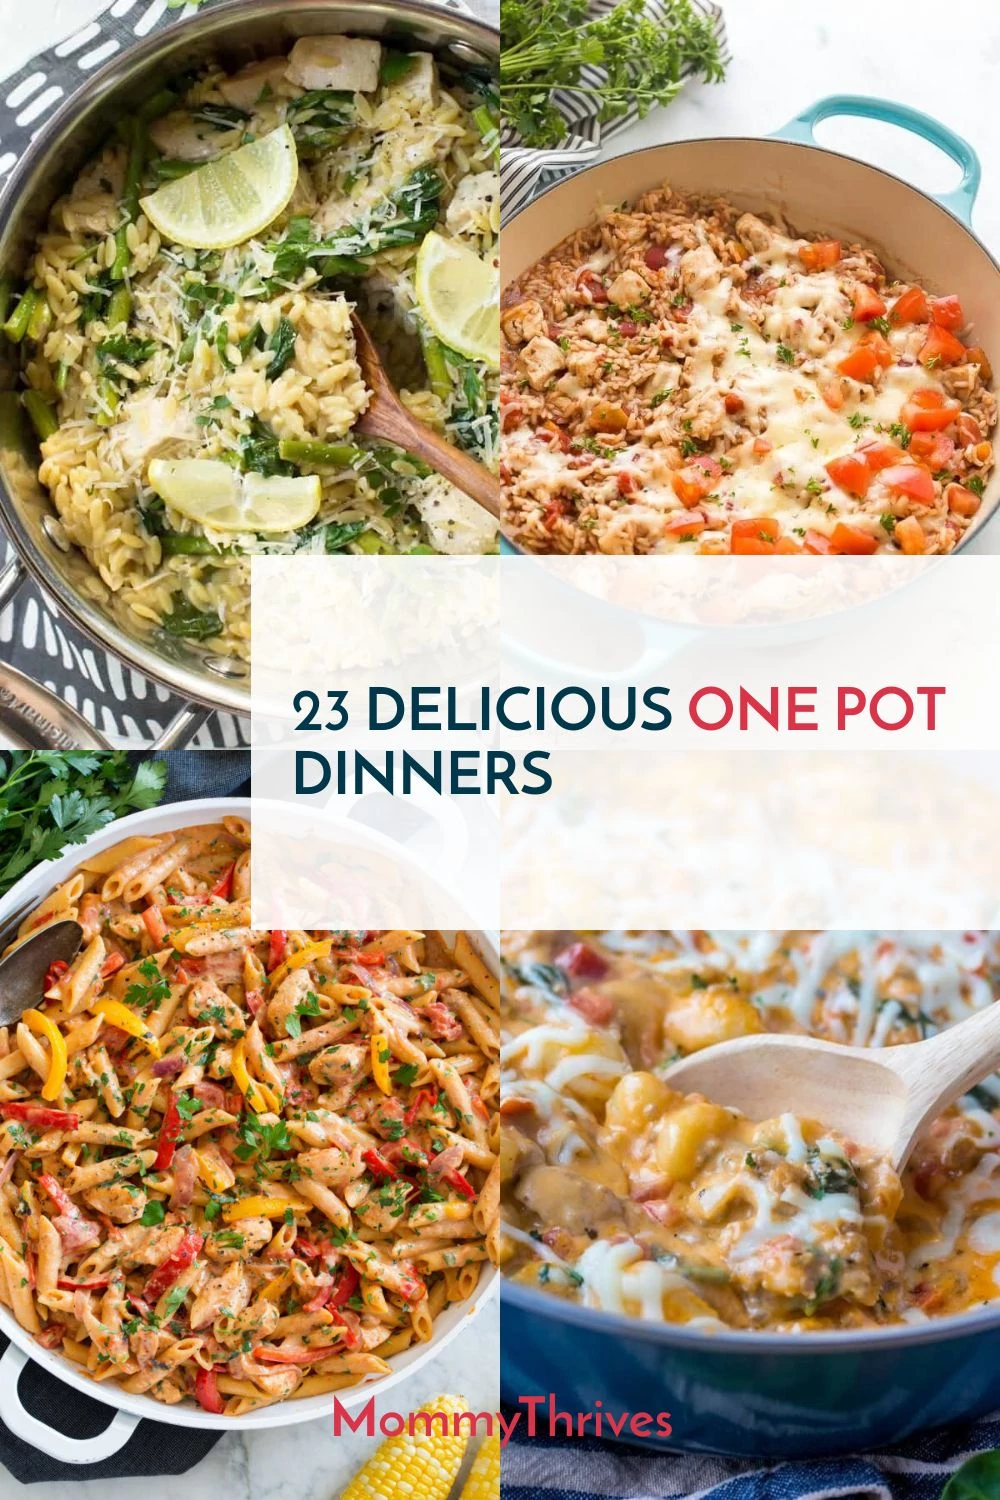 Power Quick Pot - Easy and Delicious Meals in Less Time - Powered By Mom